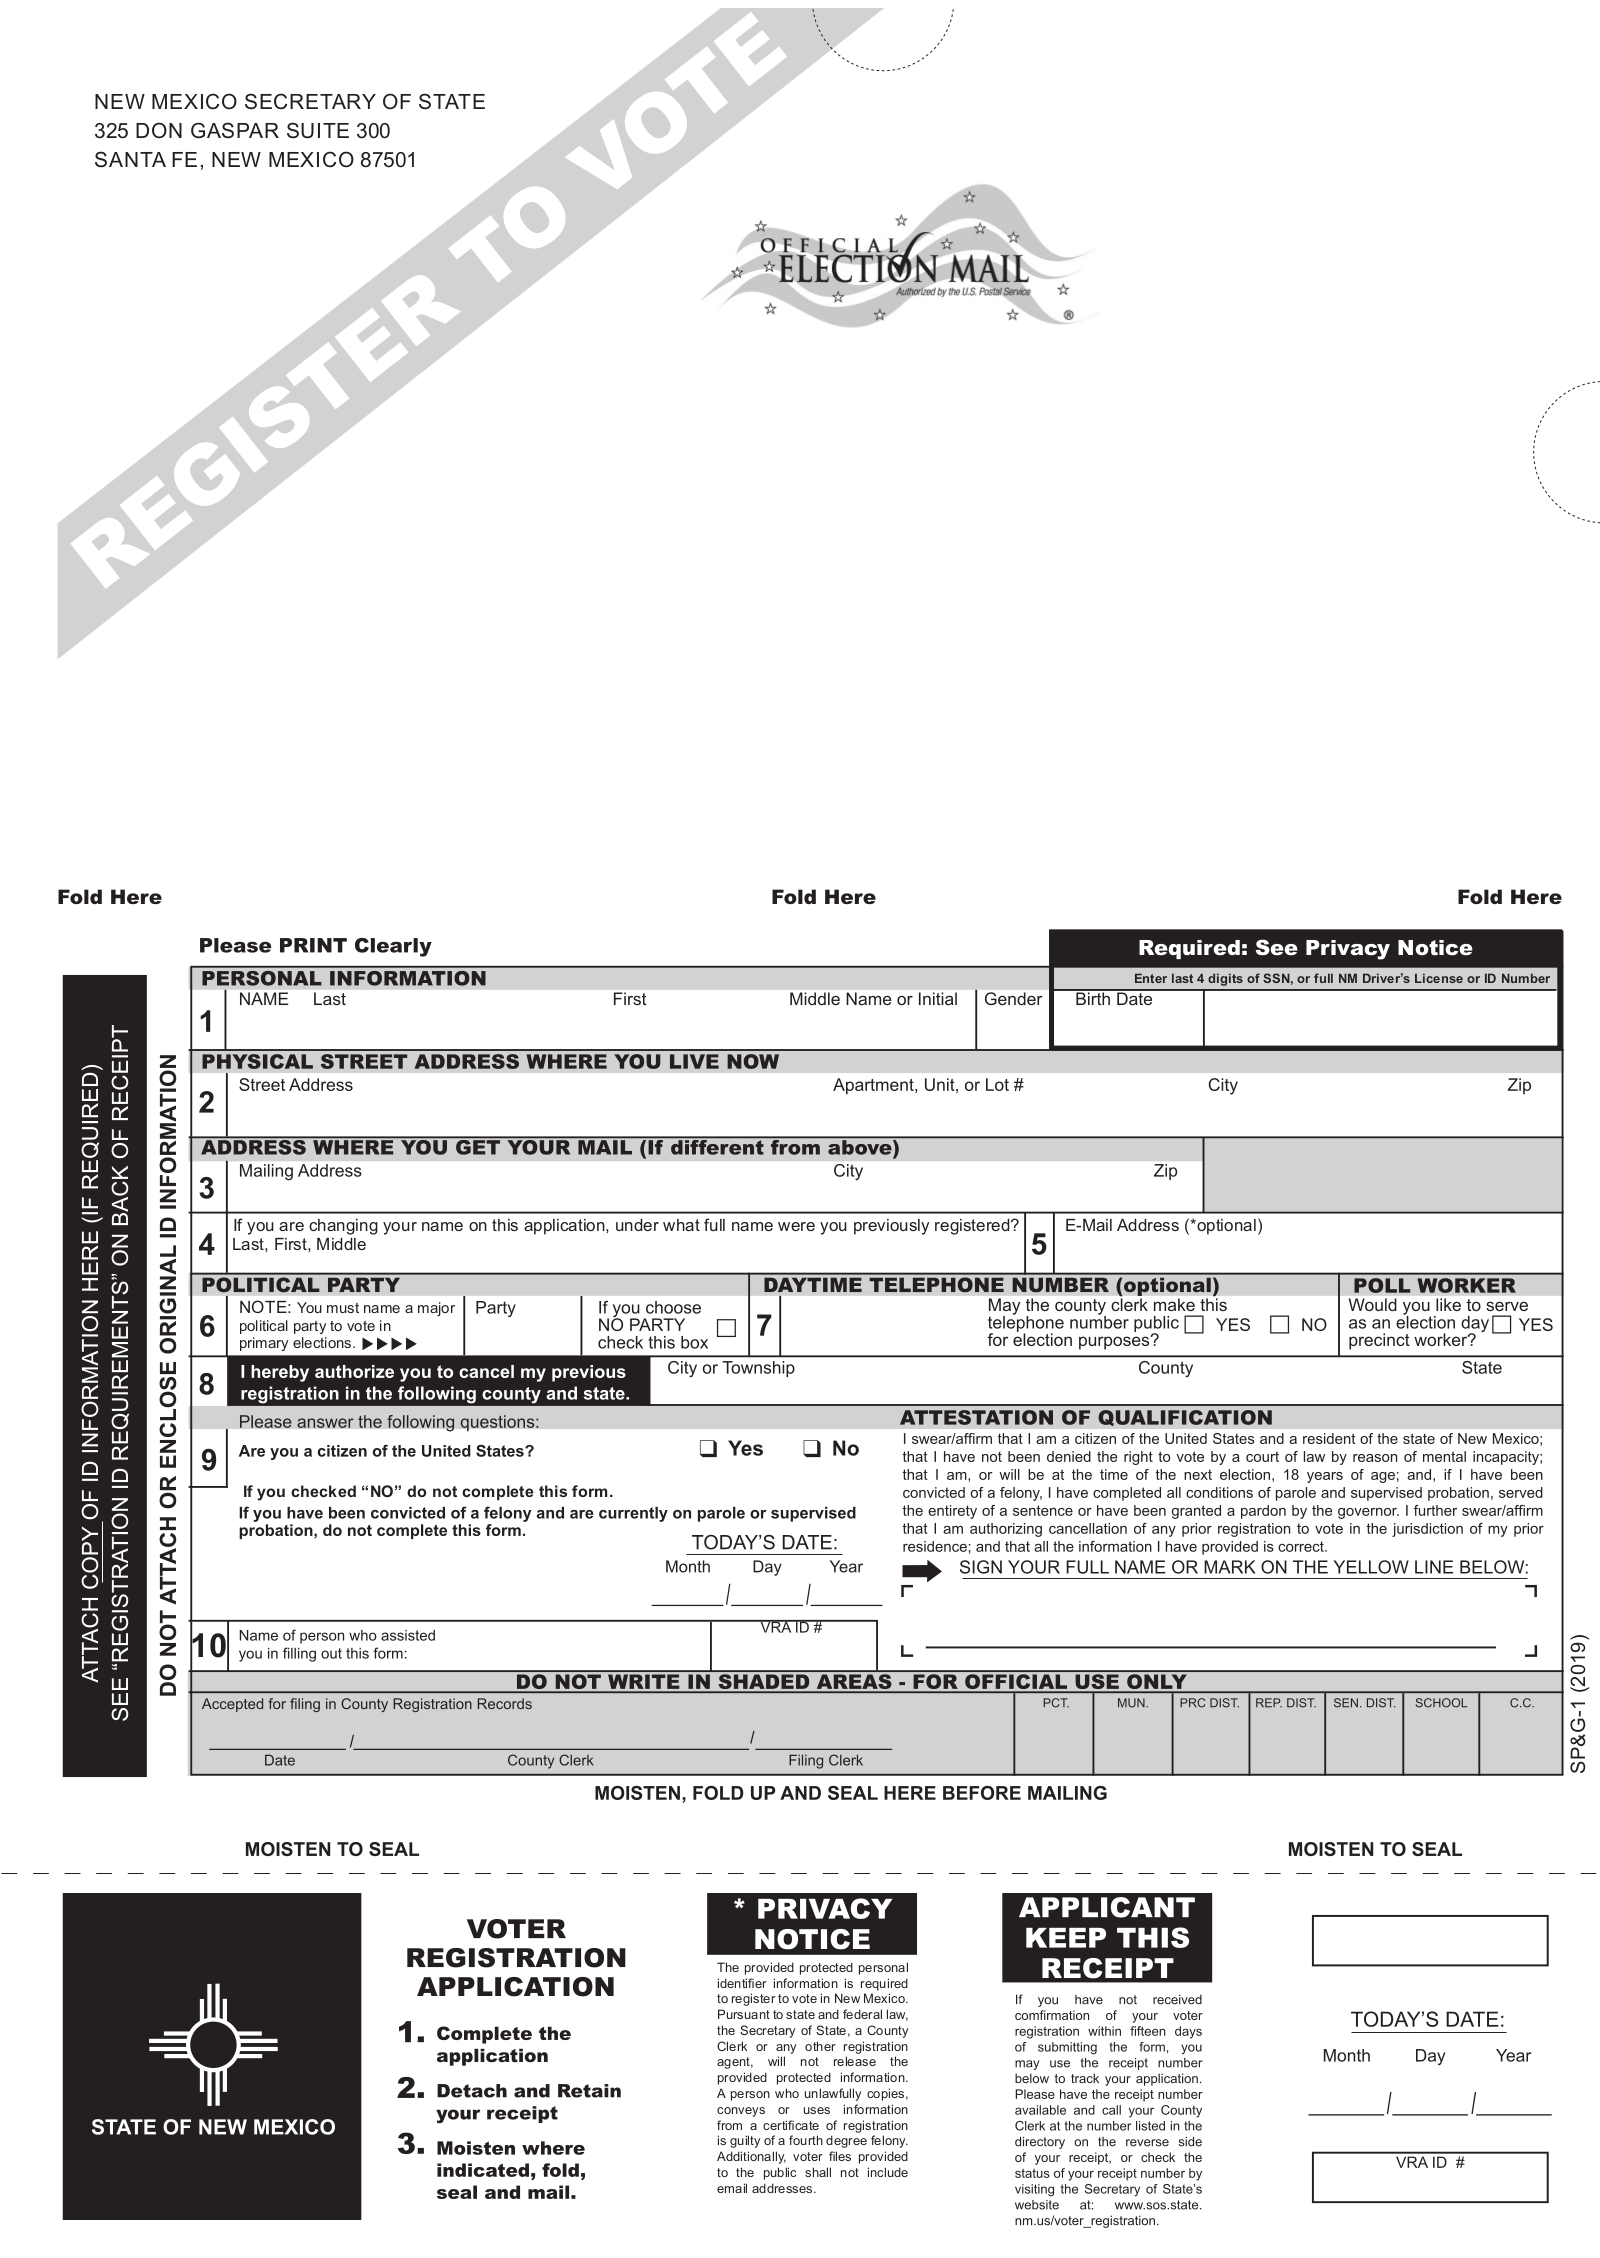 Free New Mexico Voter Registration Form – Register to Vote in NM - PDF | eForms – Free Fillable ...